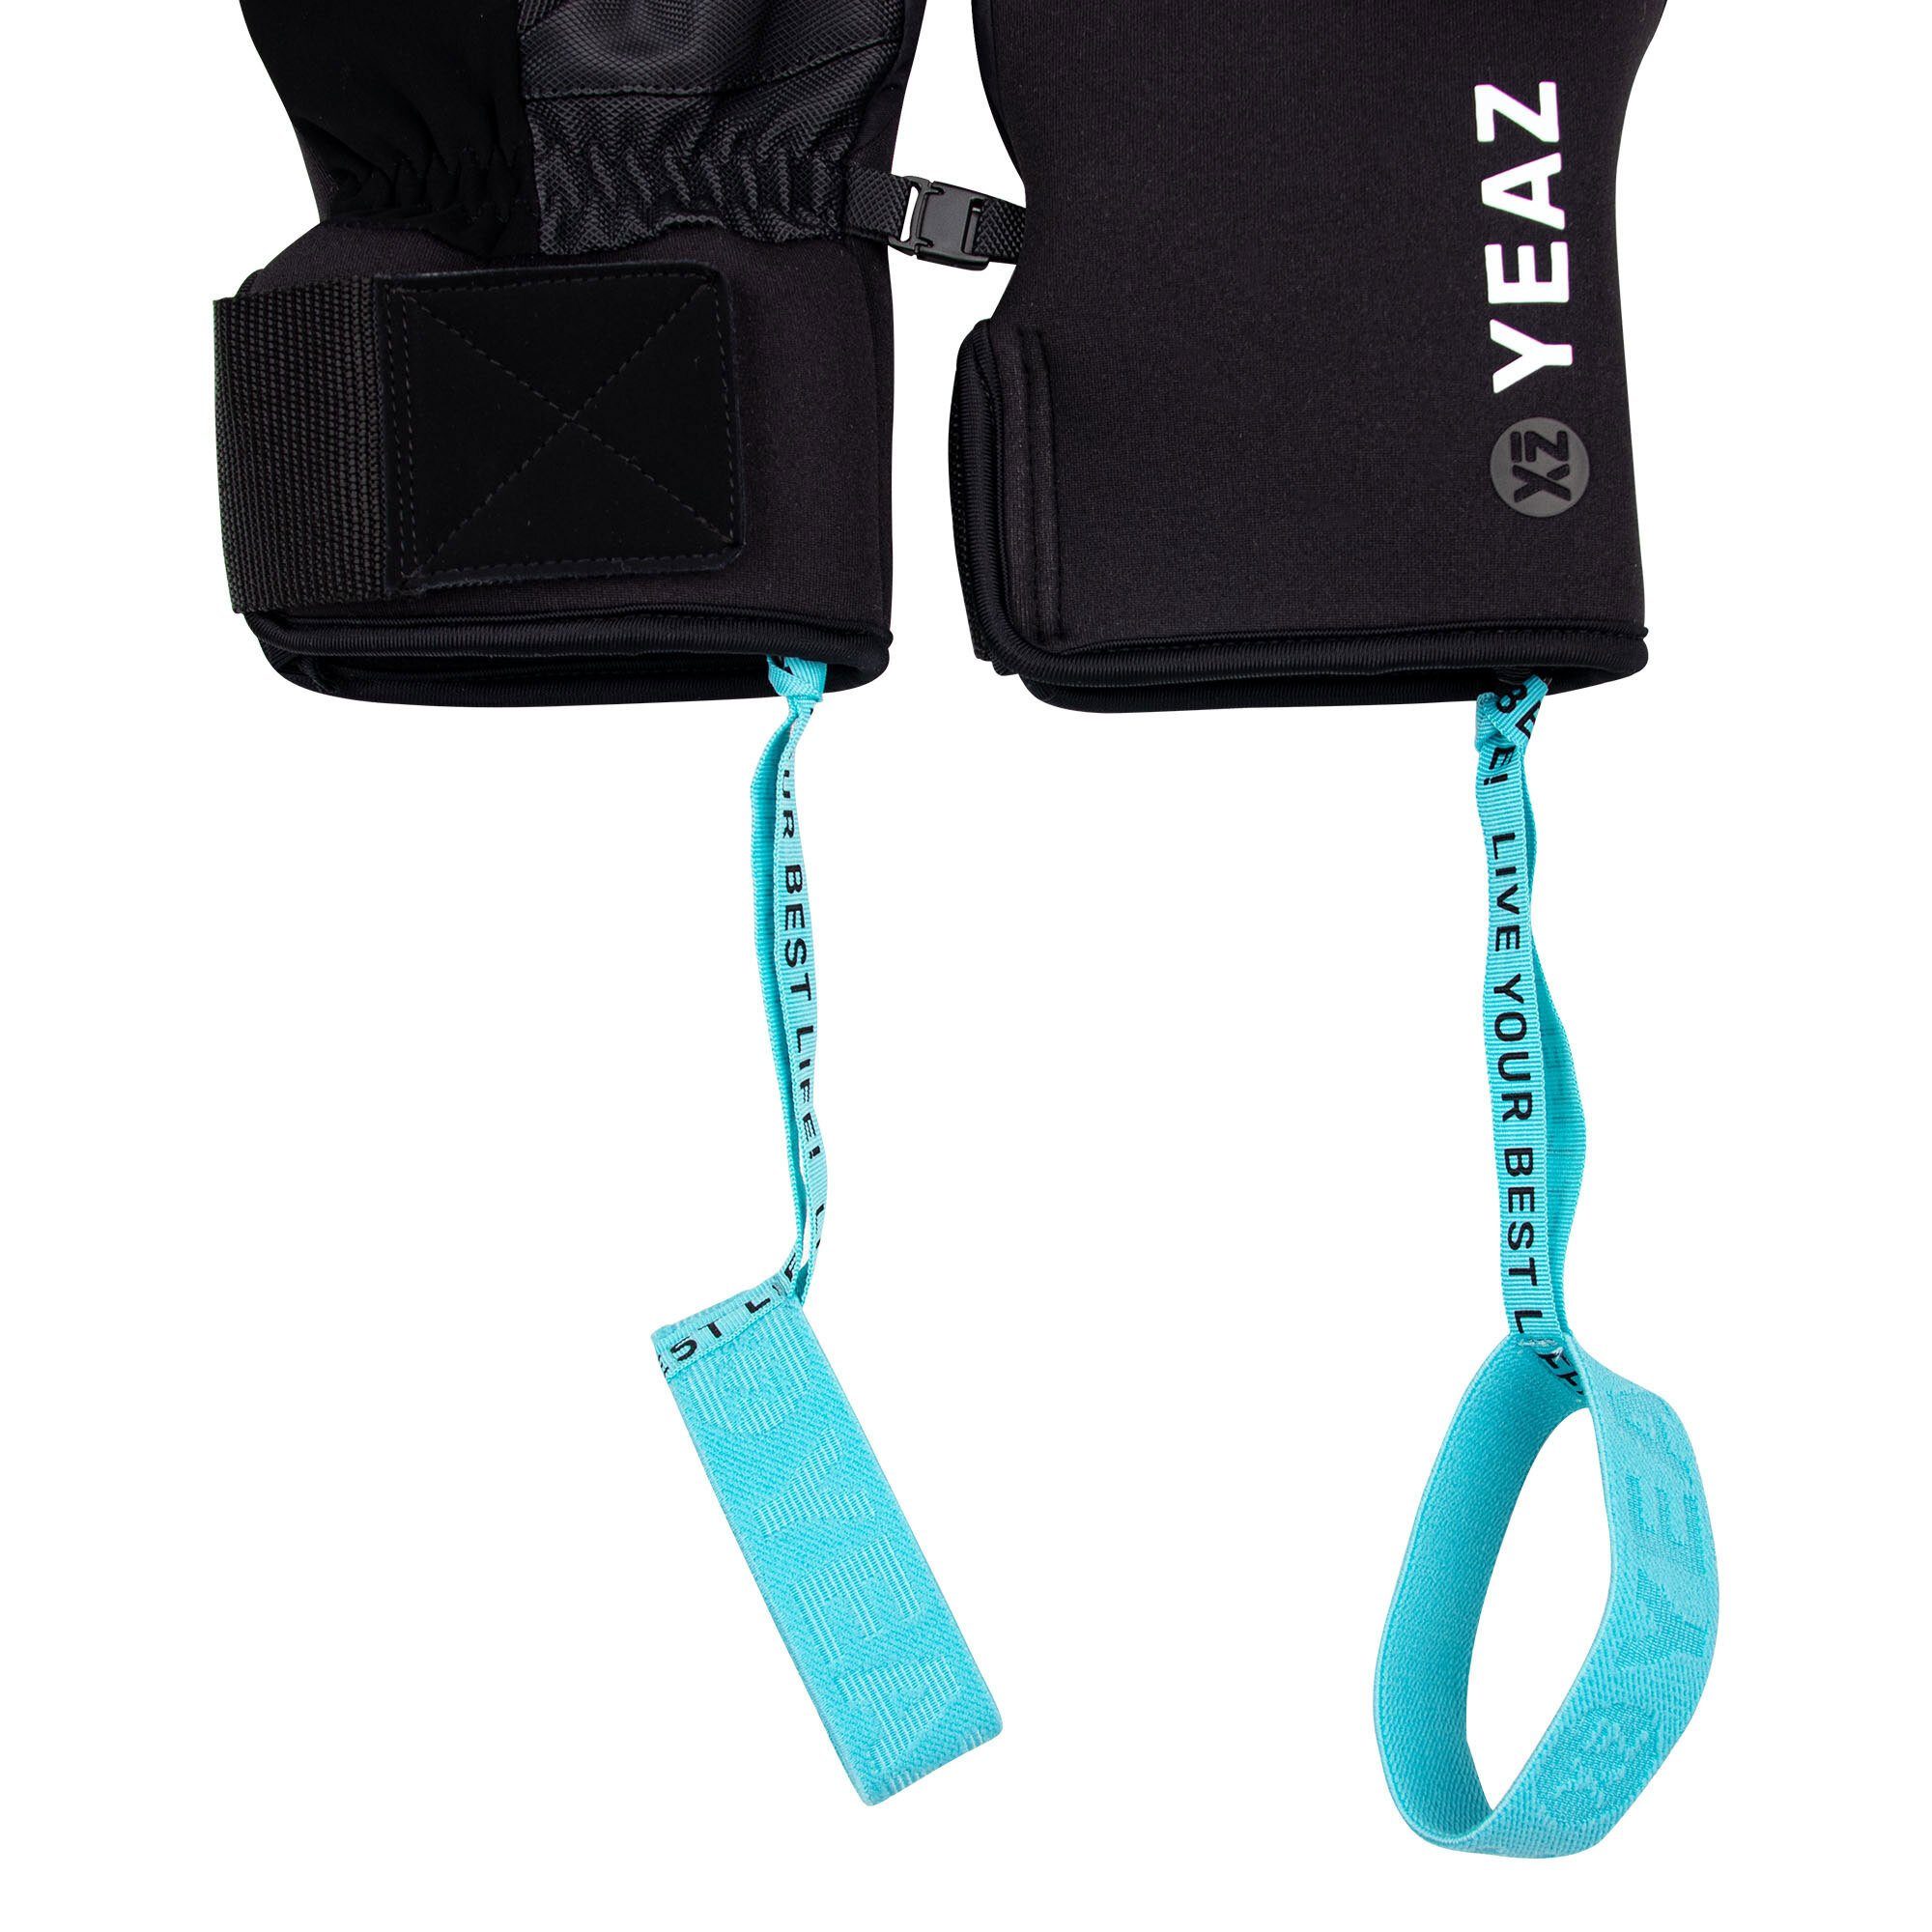 YEAZ Skihandschuhe POW Wrist-Band fausthandschuhe Touch-Funktion &